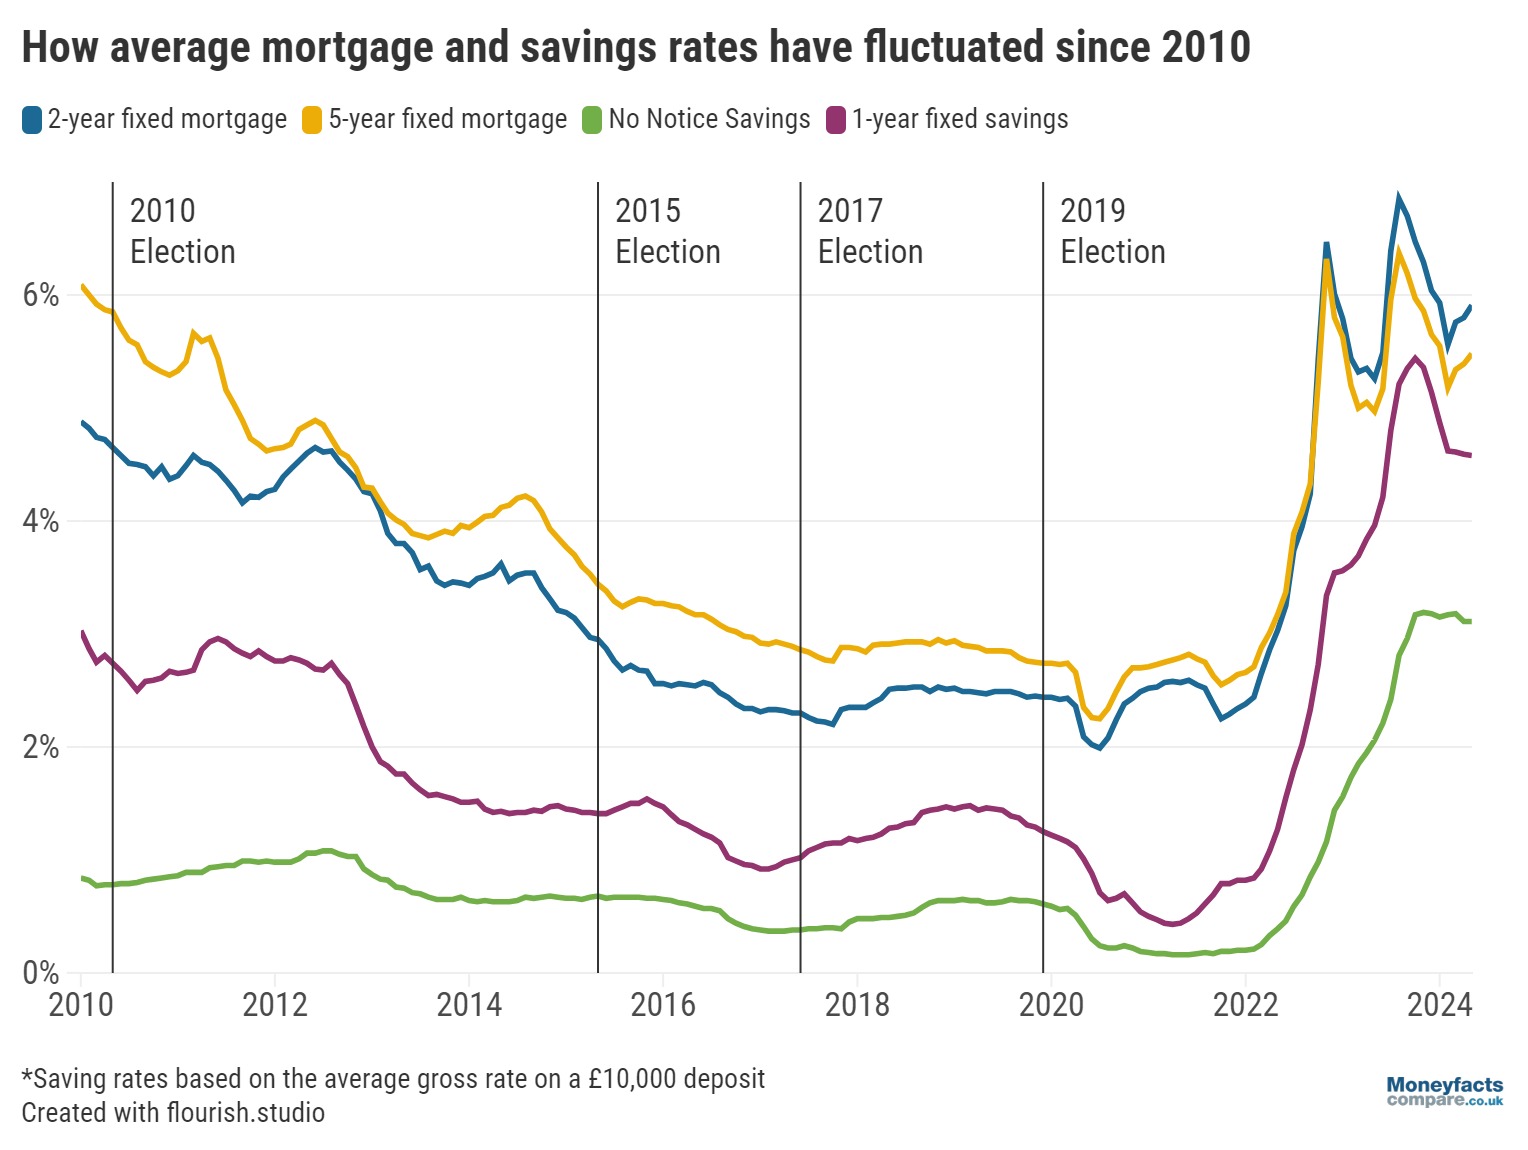 Graph showing average mortgage and savings rates since 2010